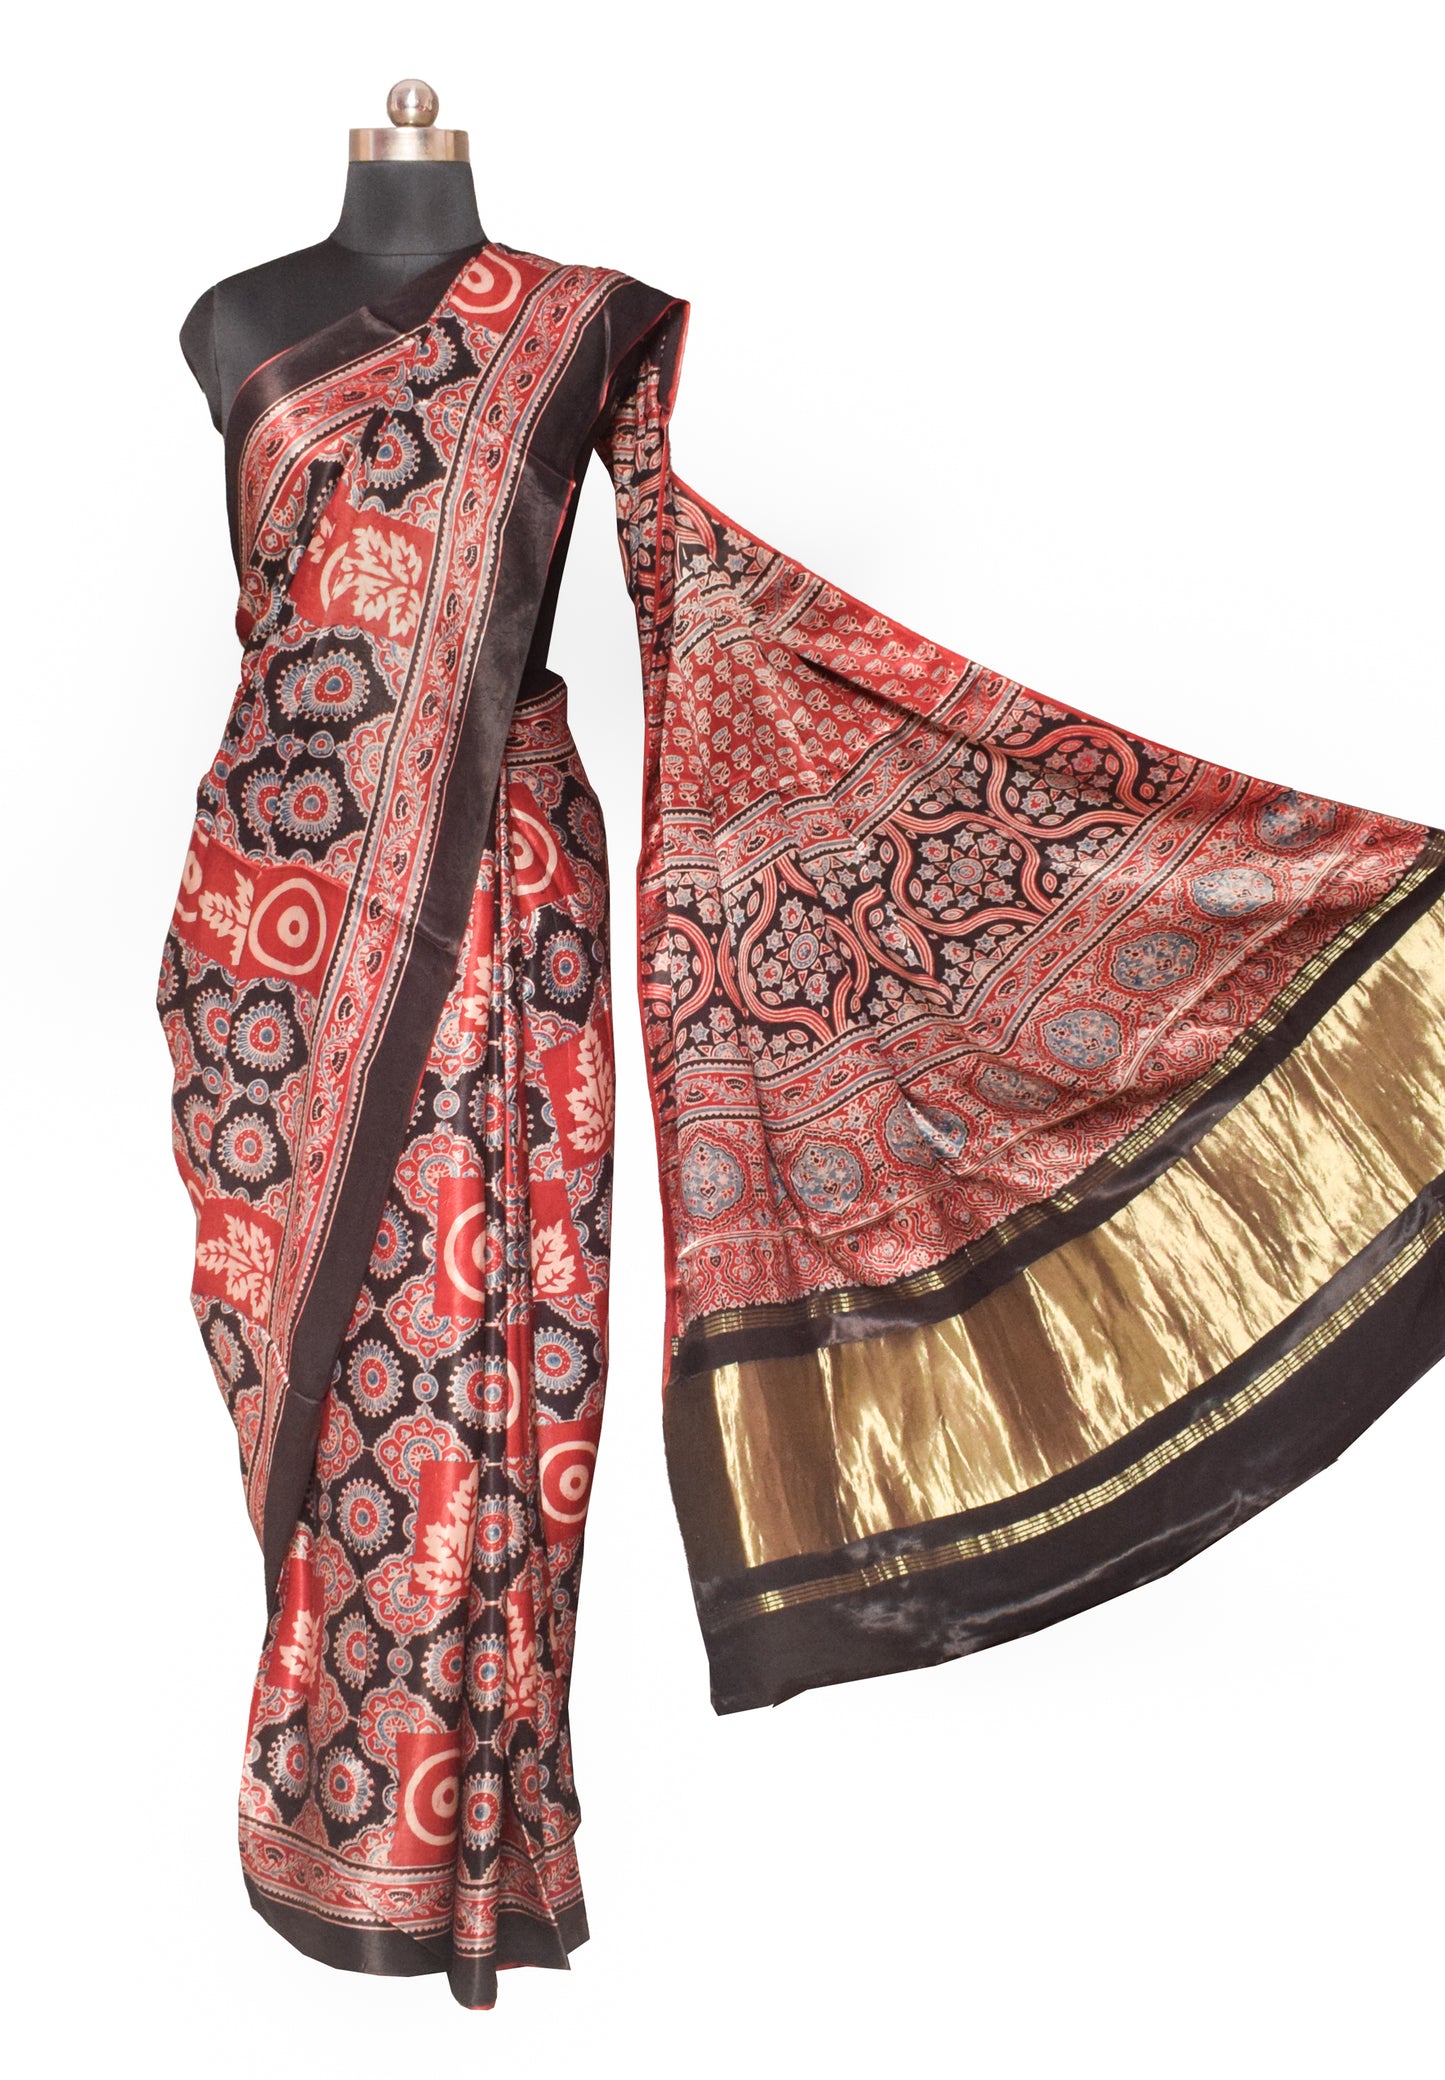 Ajrakh Modal Silk Natural Dye Hand Block Print Saree   With Golden Border  - With Blouse Piece - 6 mtrs Length    -  SKU : ID15101V